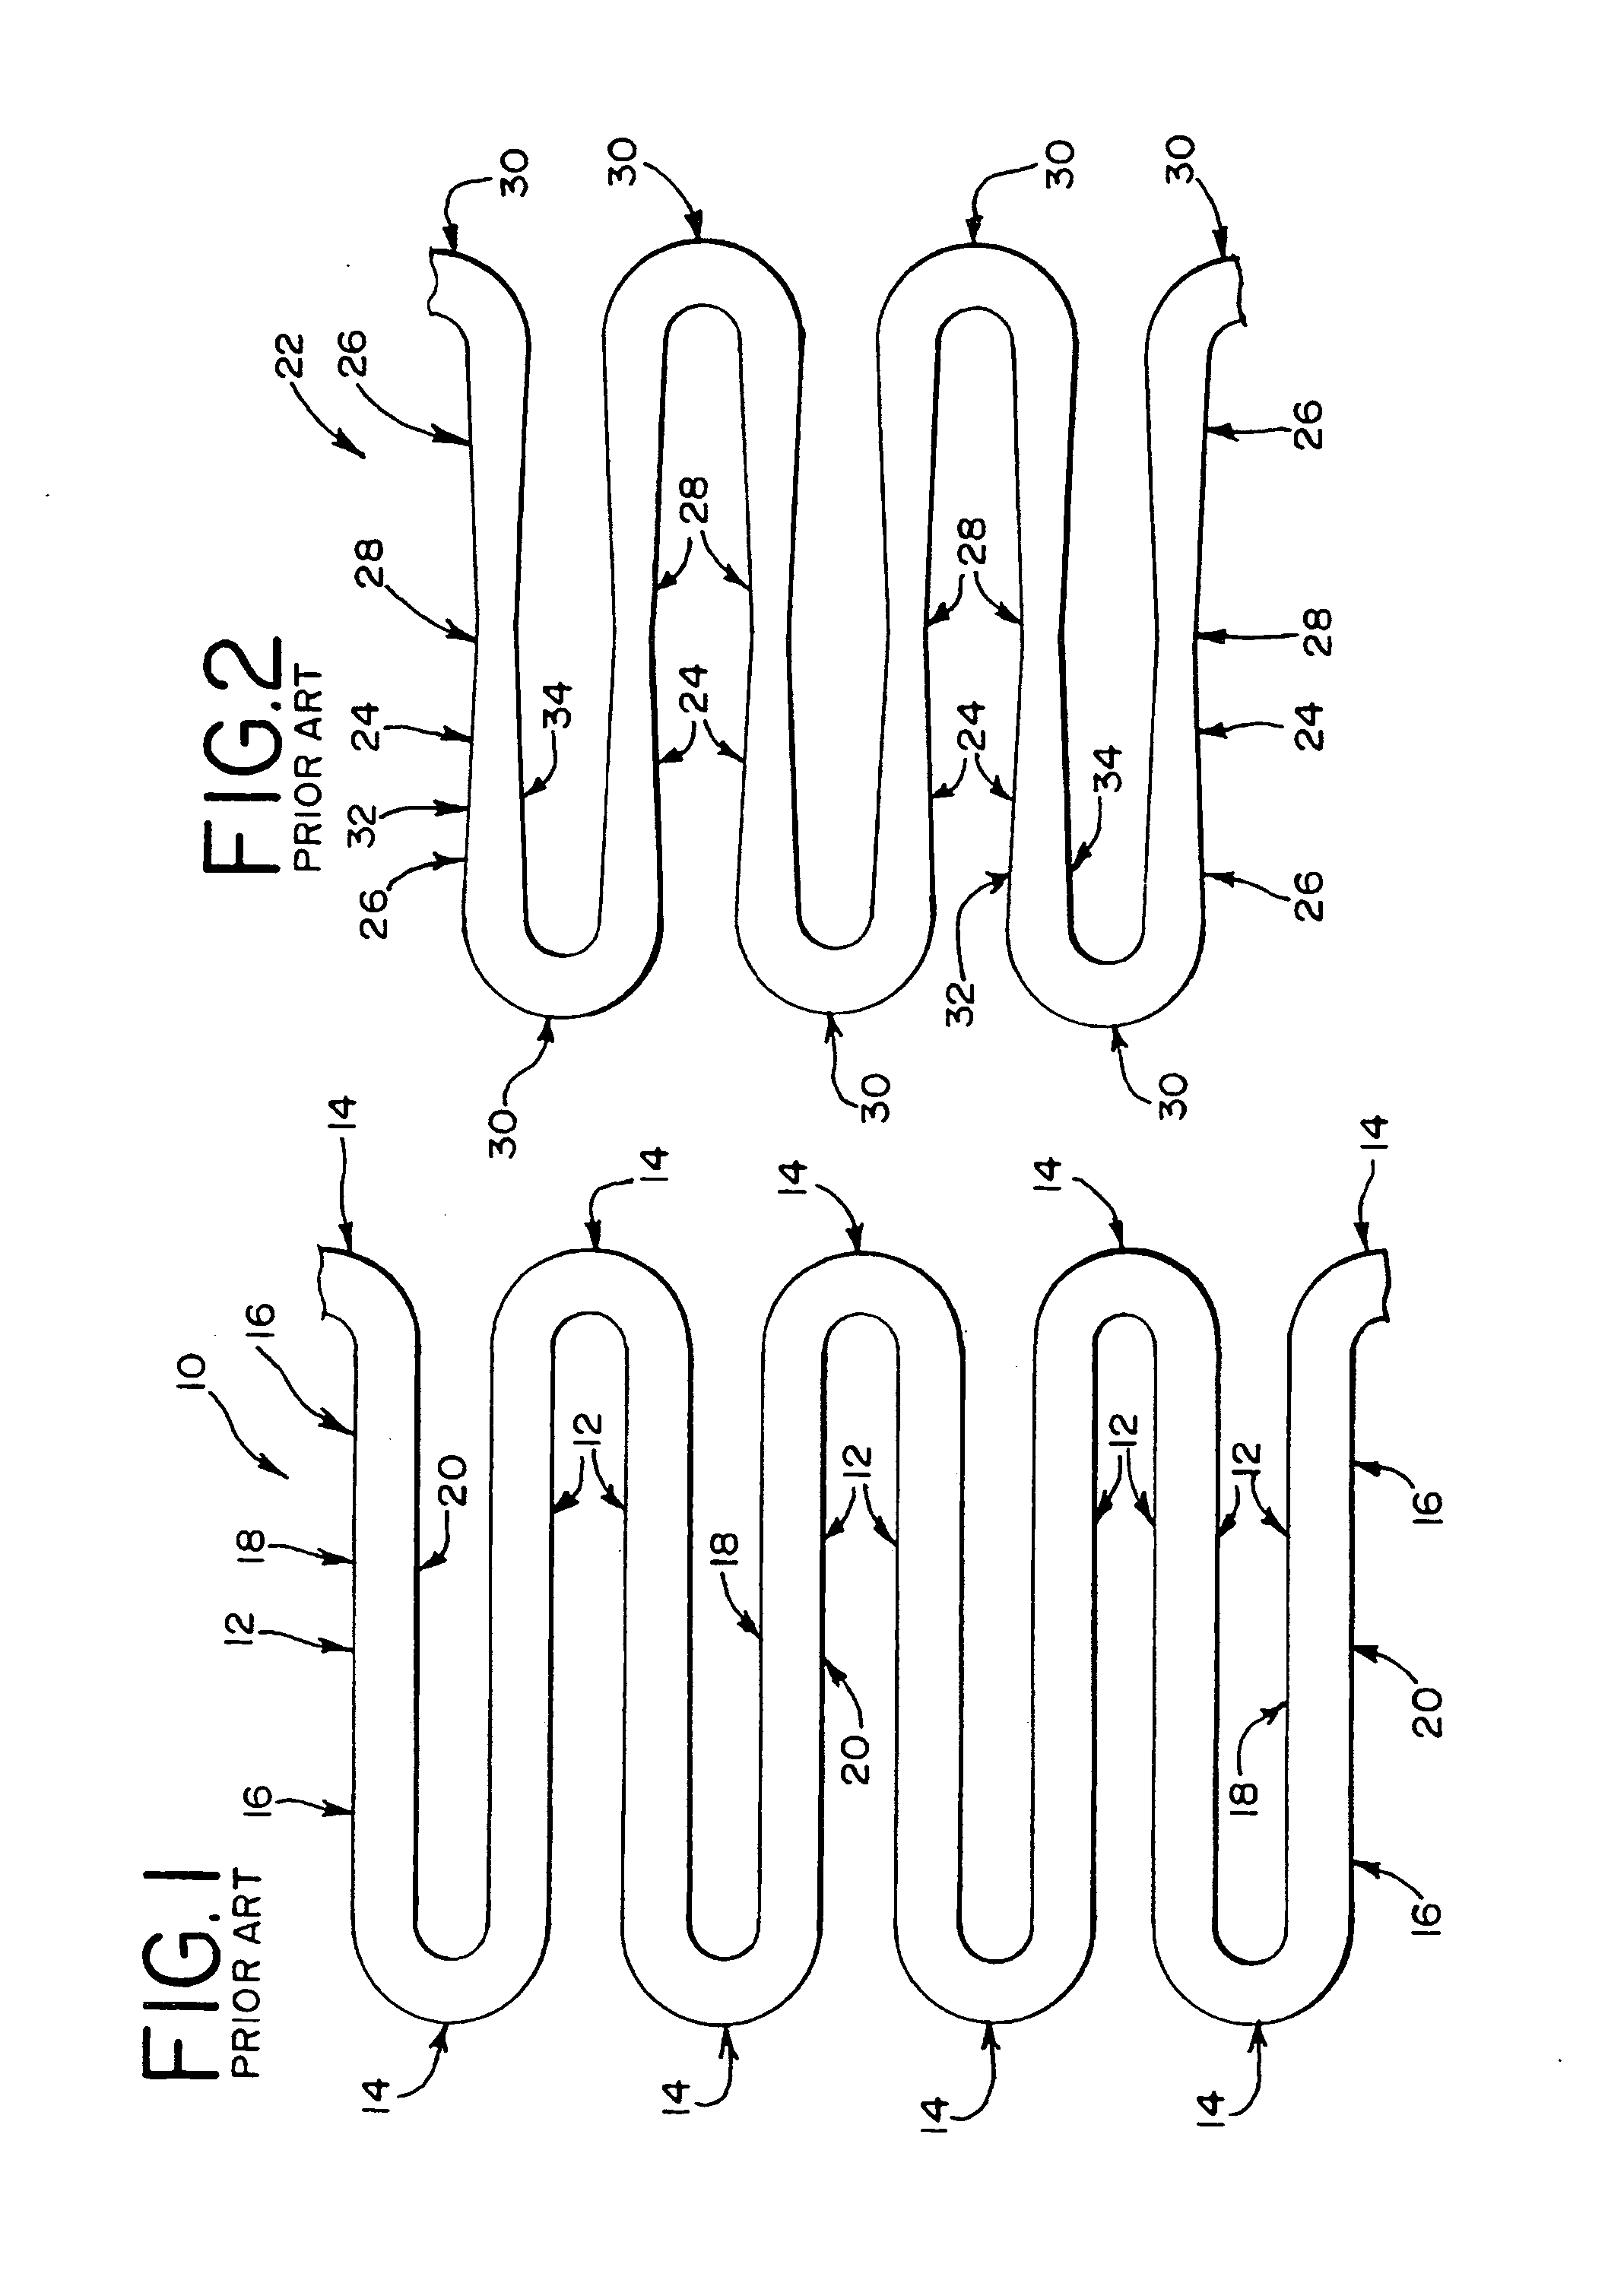 Intraluminal device with improved tapered beams